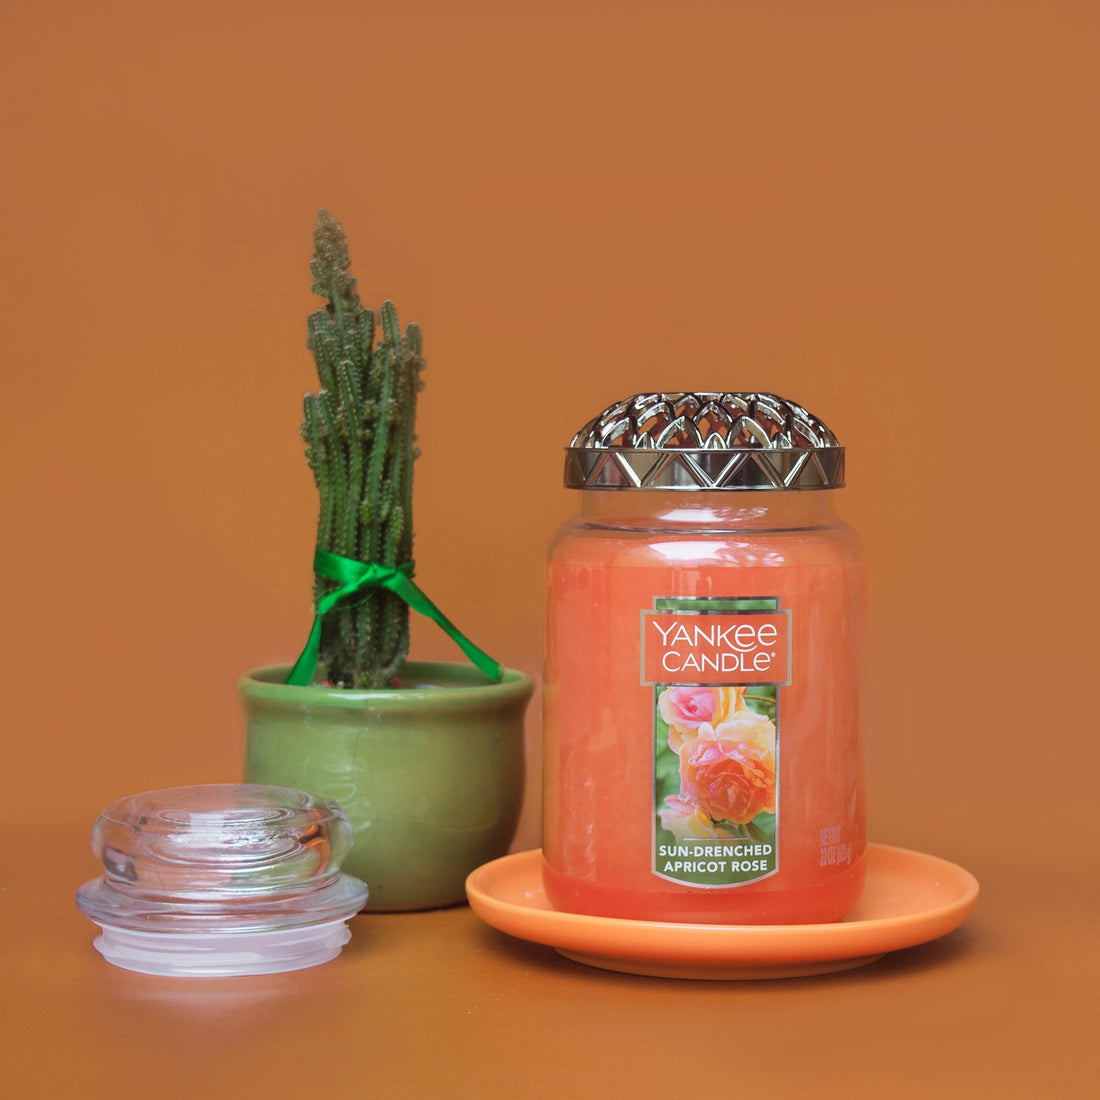 Surprise The Remarkable Women In Your Life With These Delightful Candles